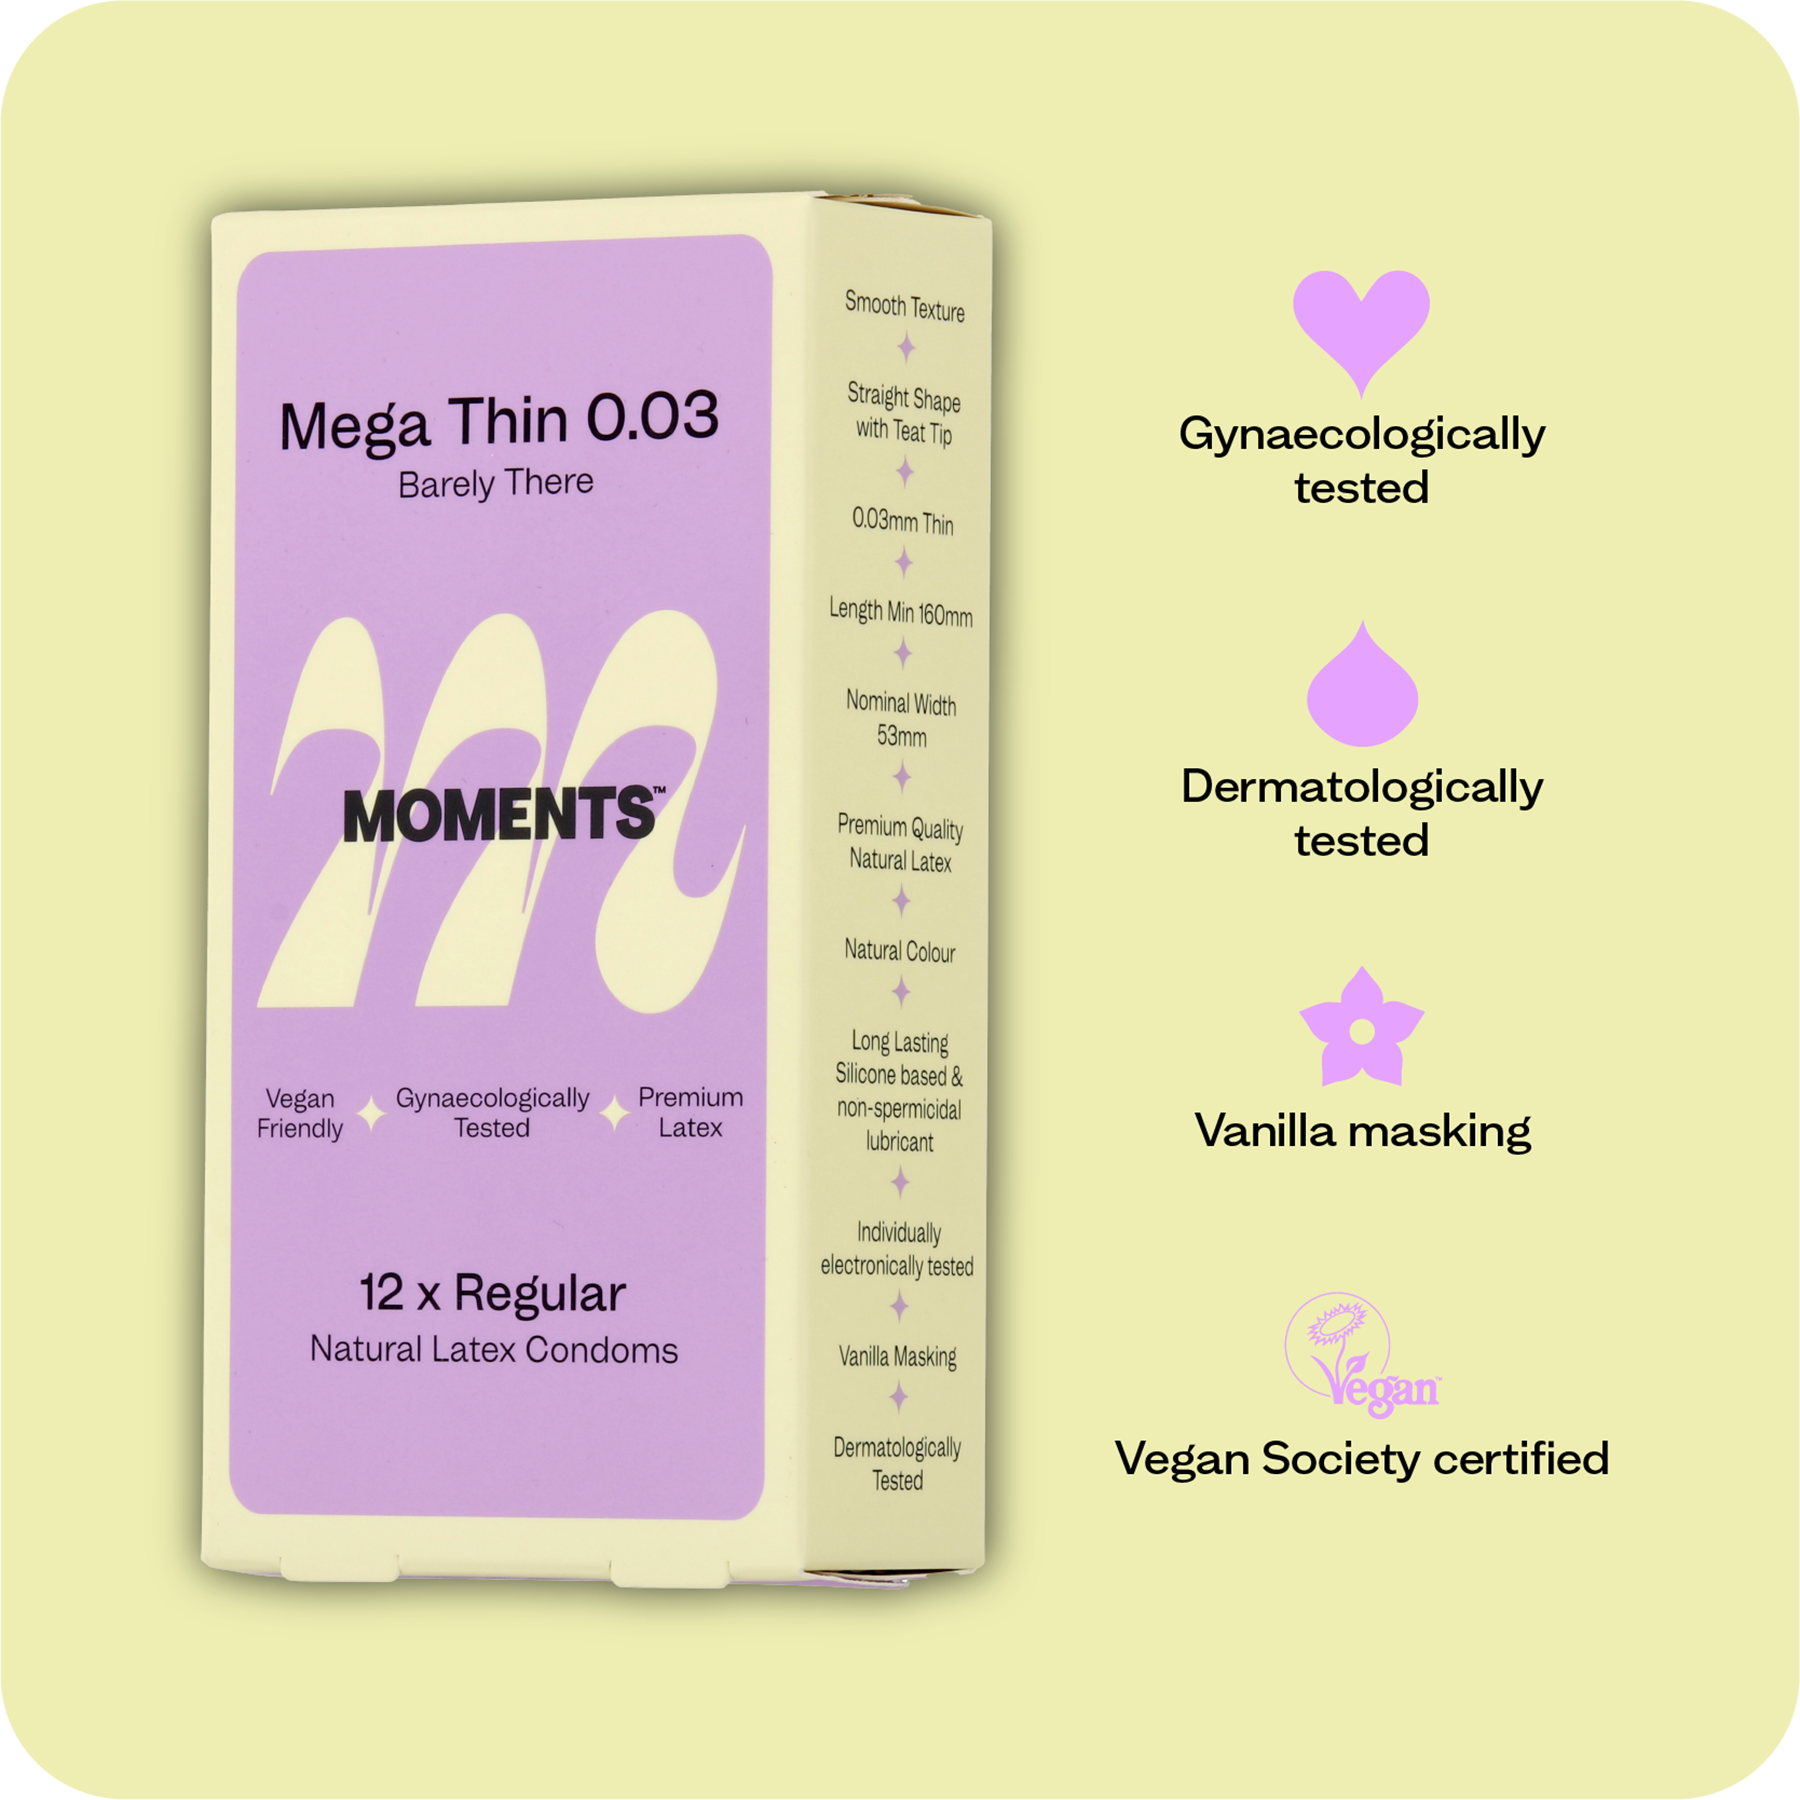 Product display of Moments Mega Thin 0.03 condoms with emphasis on the 0.03 thickness feature